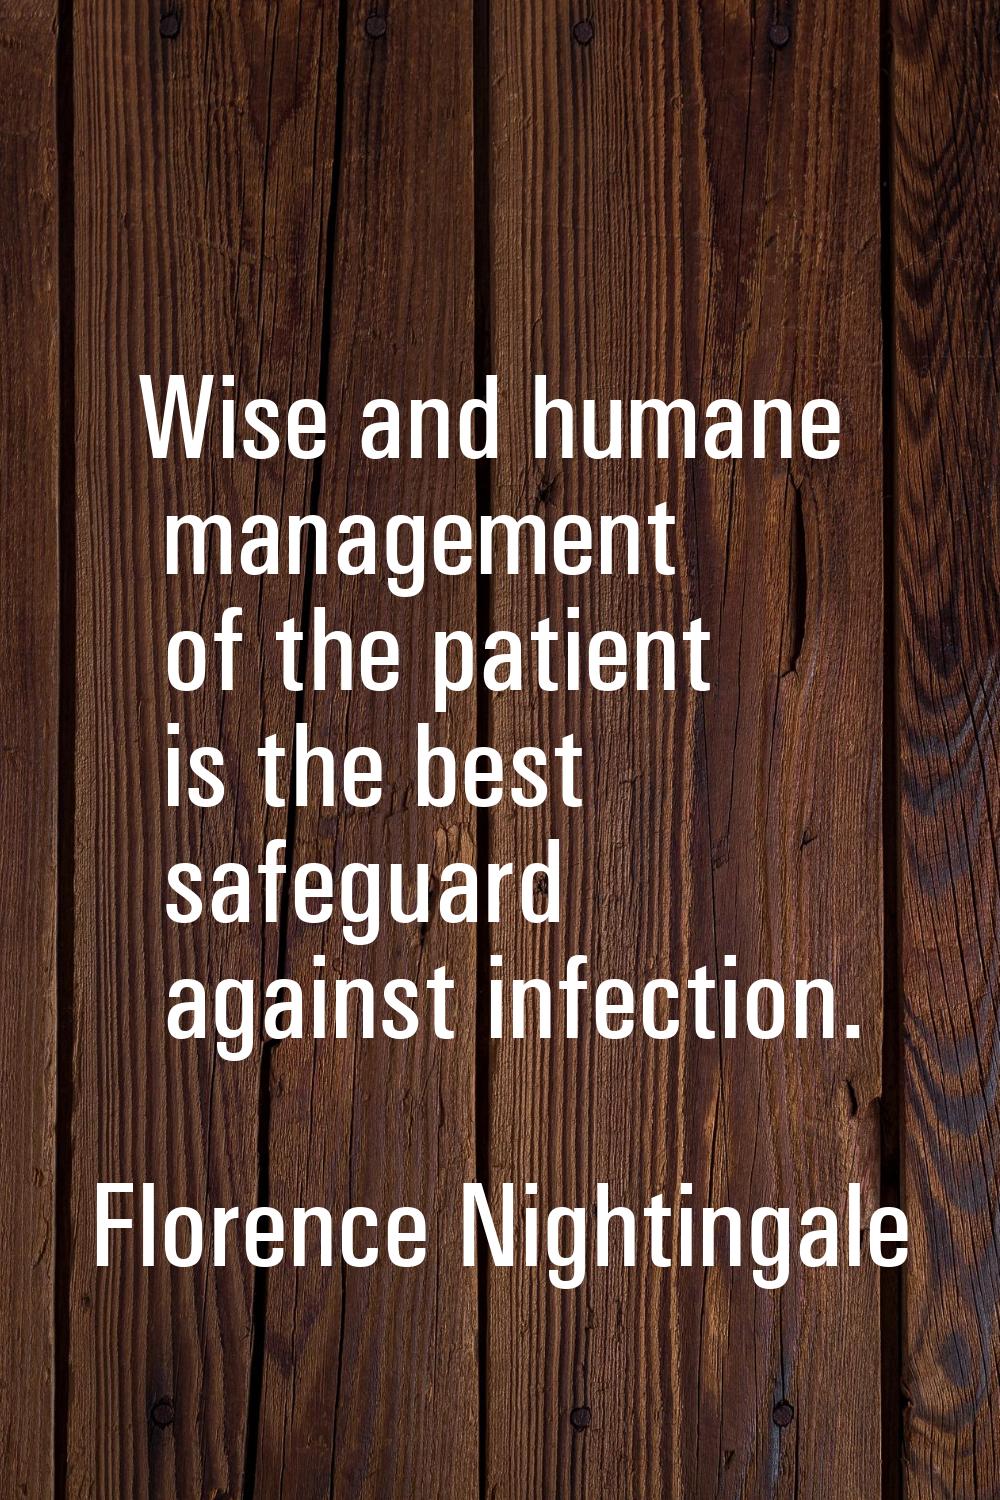 Wise and humane management of the patient is the best safeguard against infection.